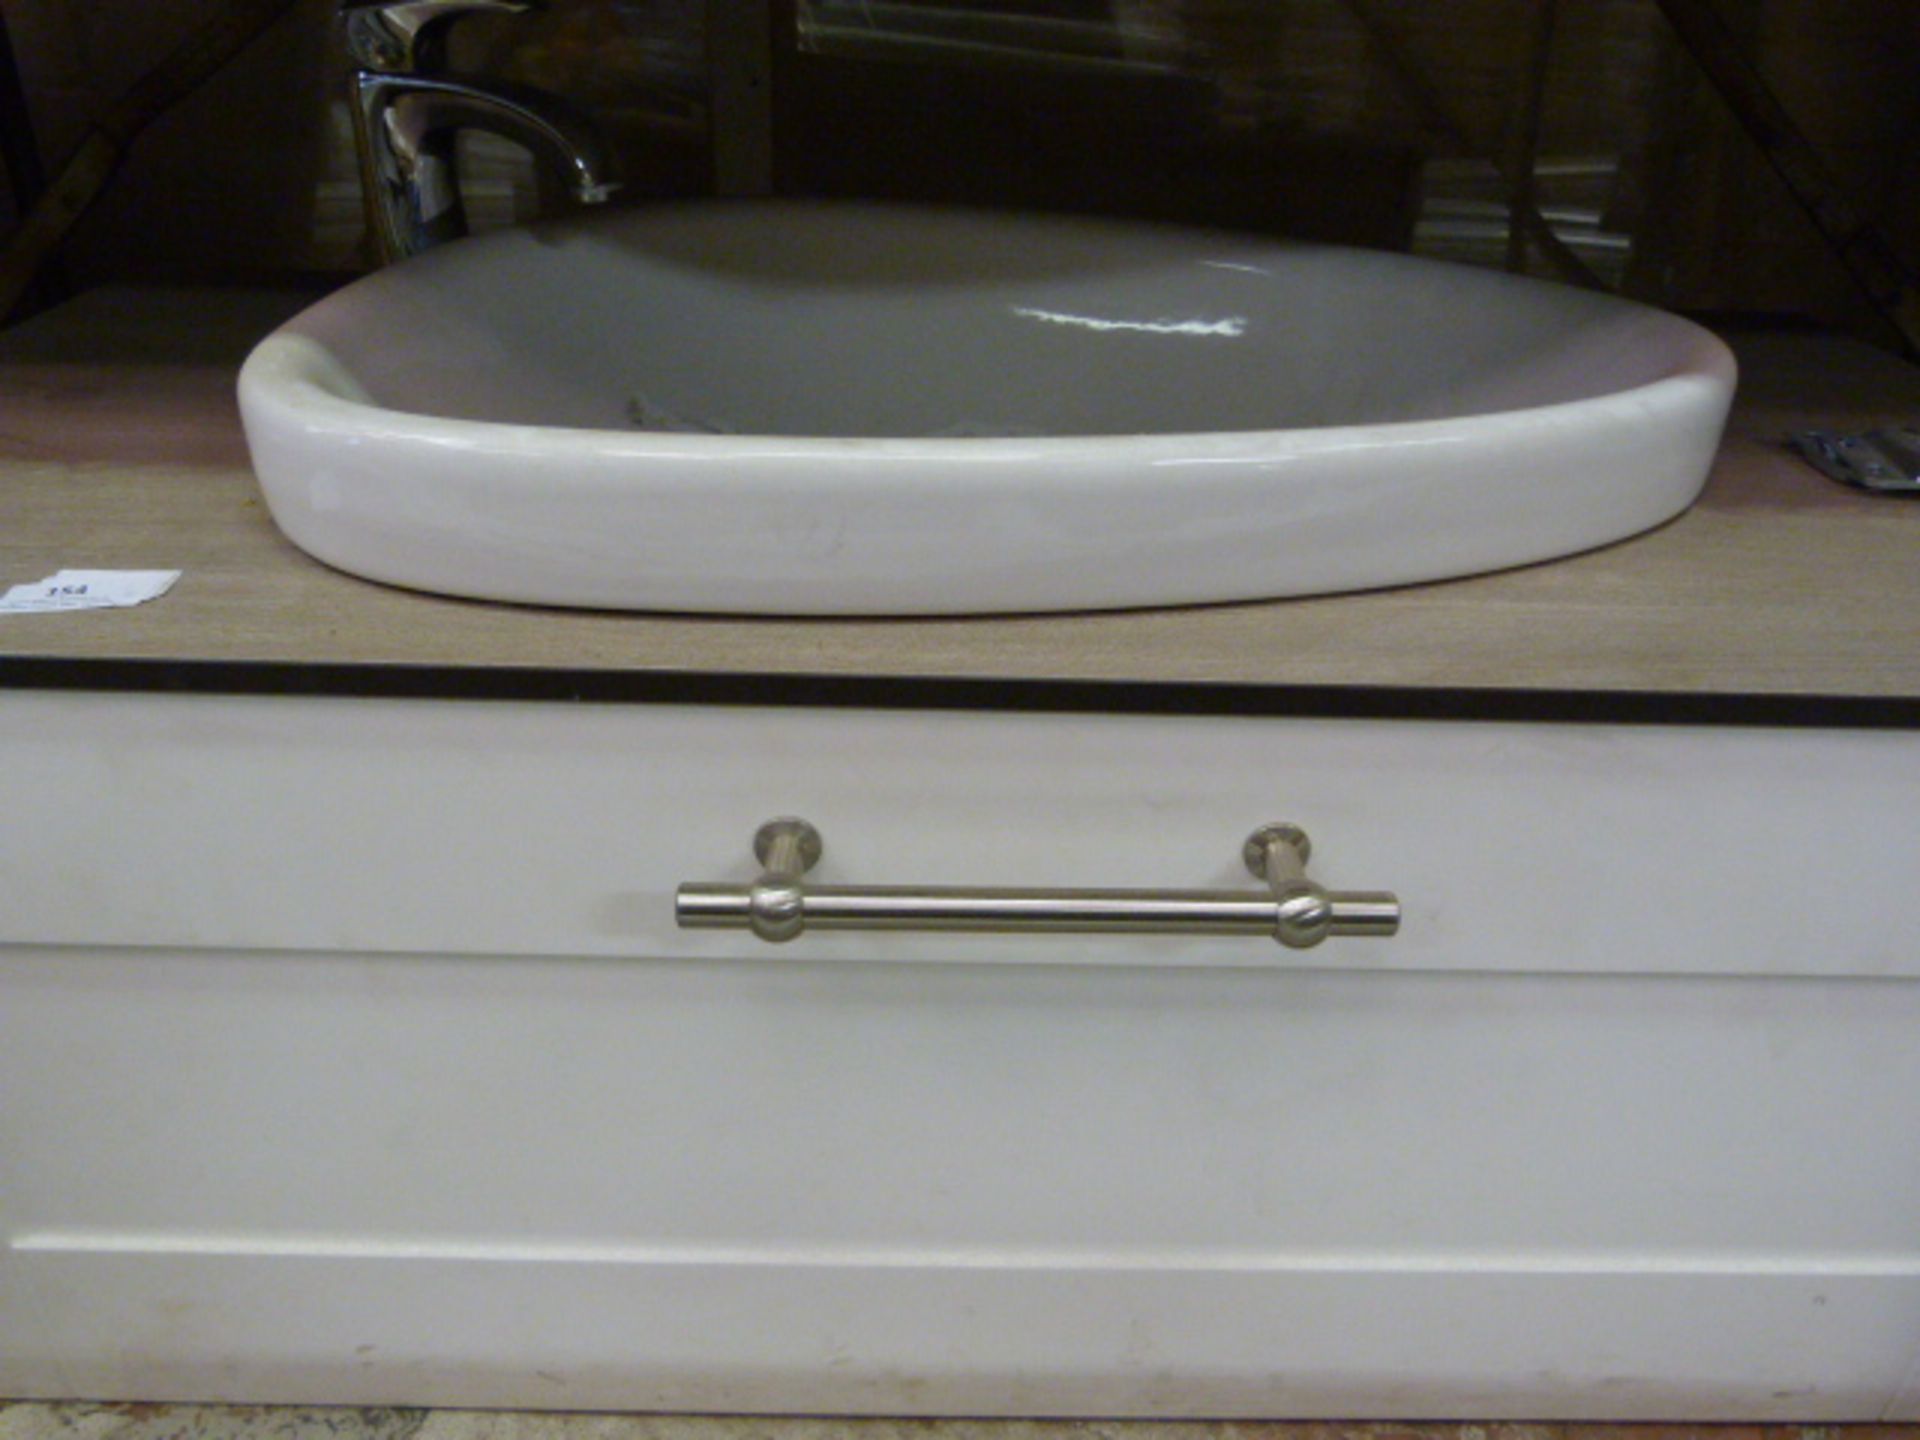 *Contemporary Sink Unit with Drawer and Chrome Tap